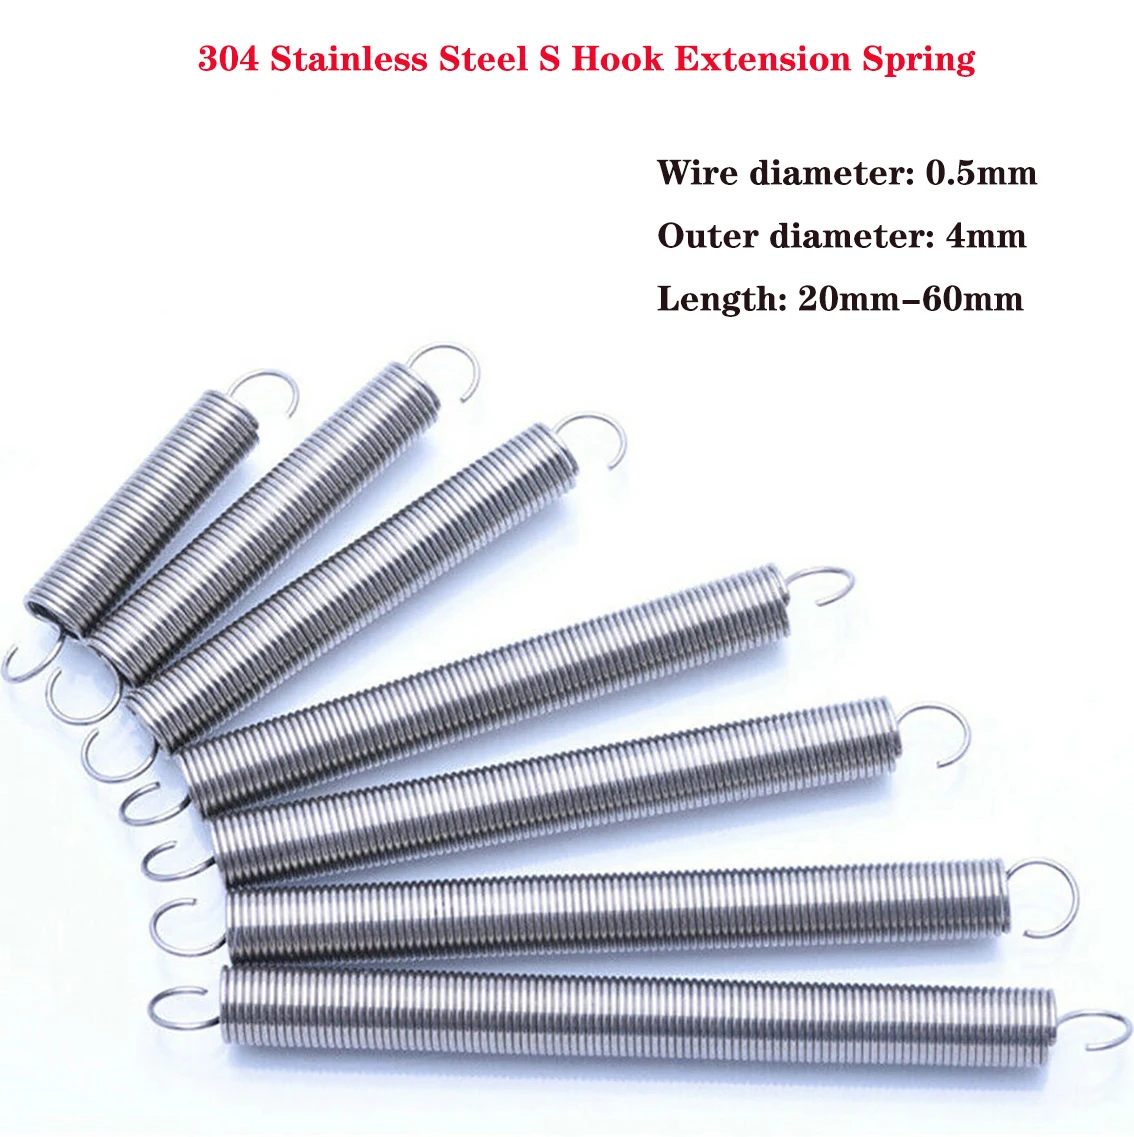 

10Pcs Wire Dia 0.5mm S Hook Extension Spring 304 Stainless Steel Cylindroid Helical Pullback Tension Coil Spring Length 20-60mm